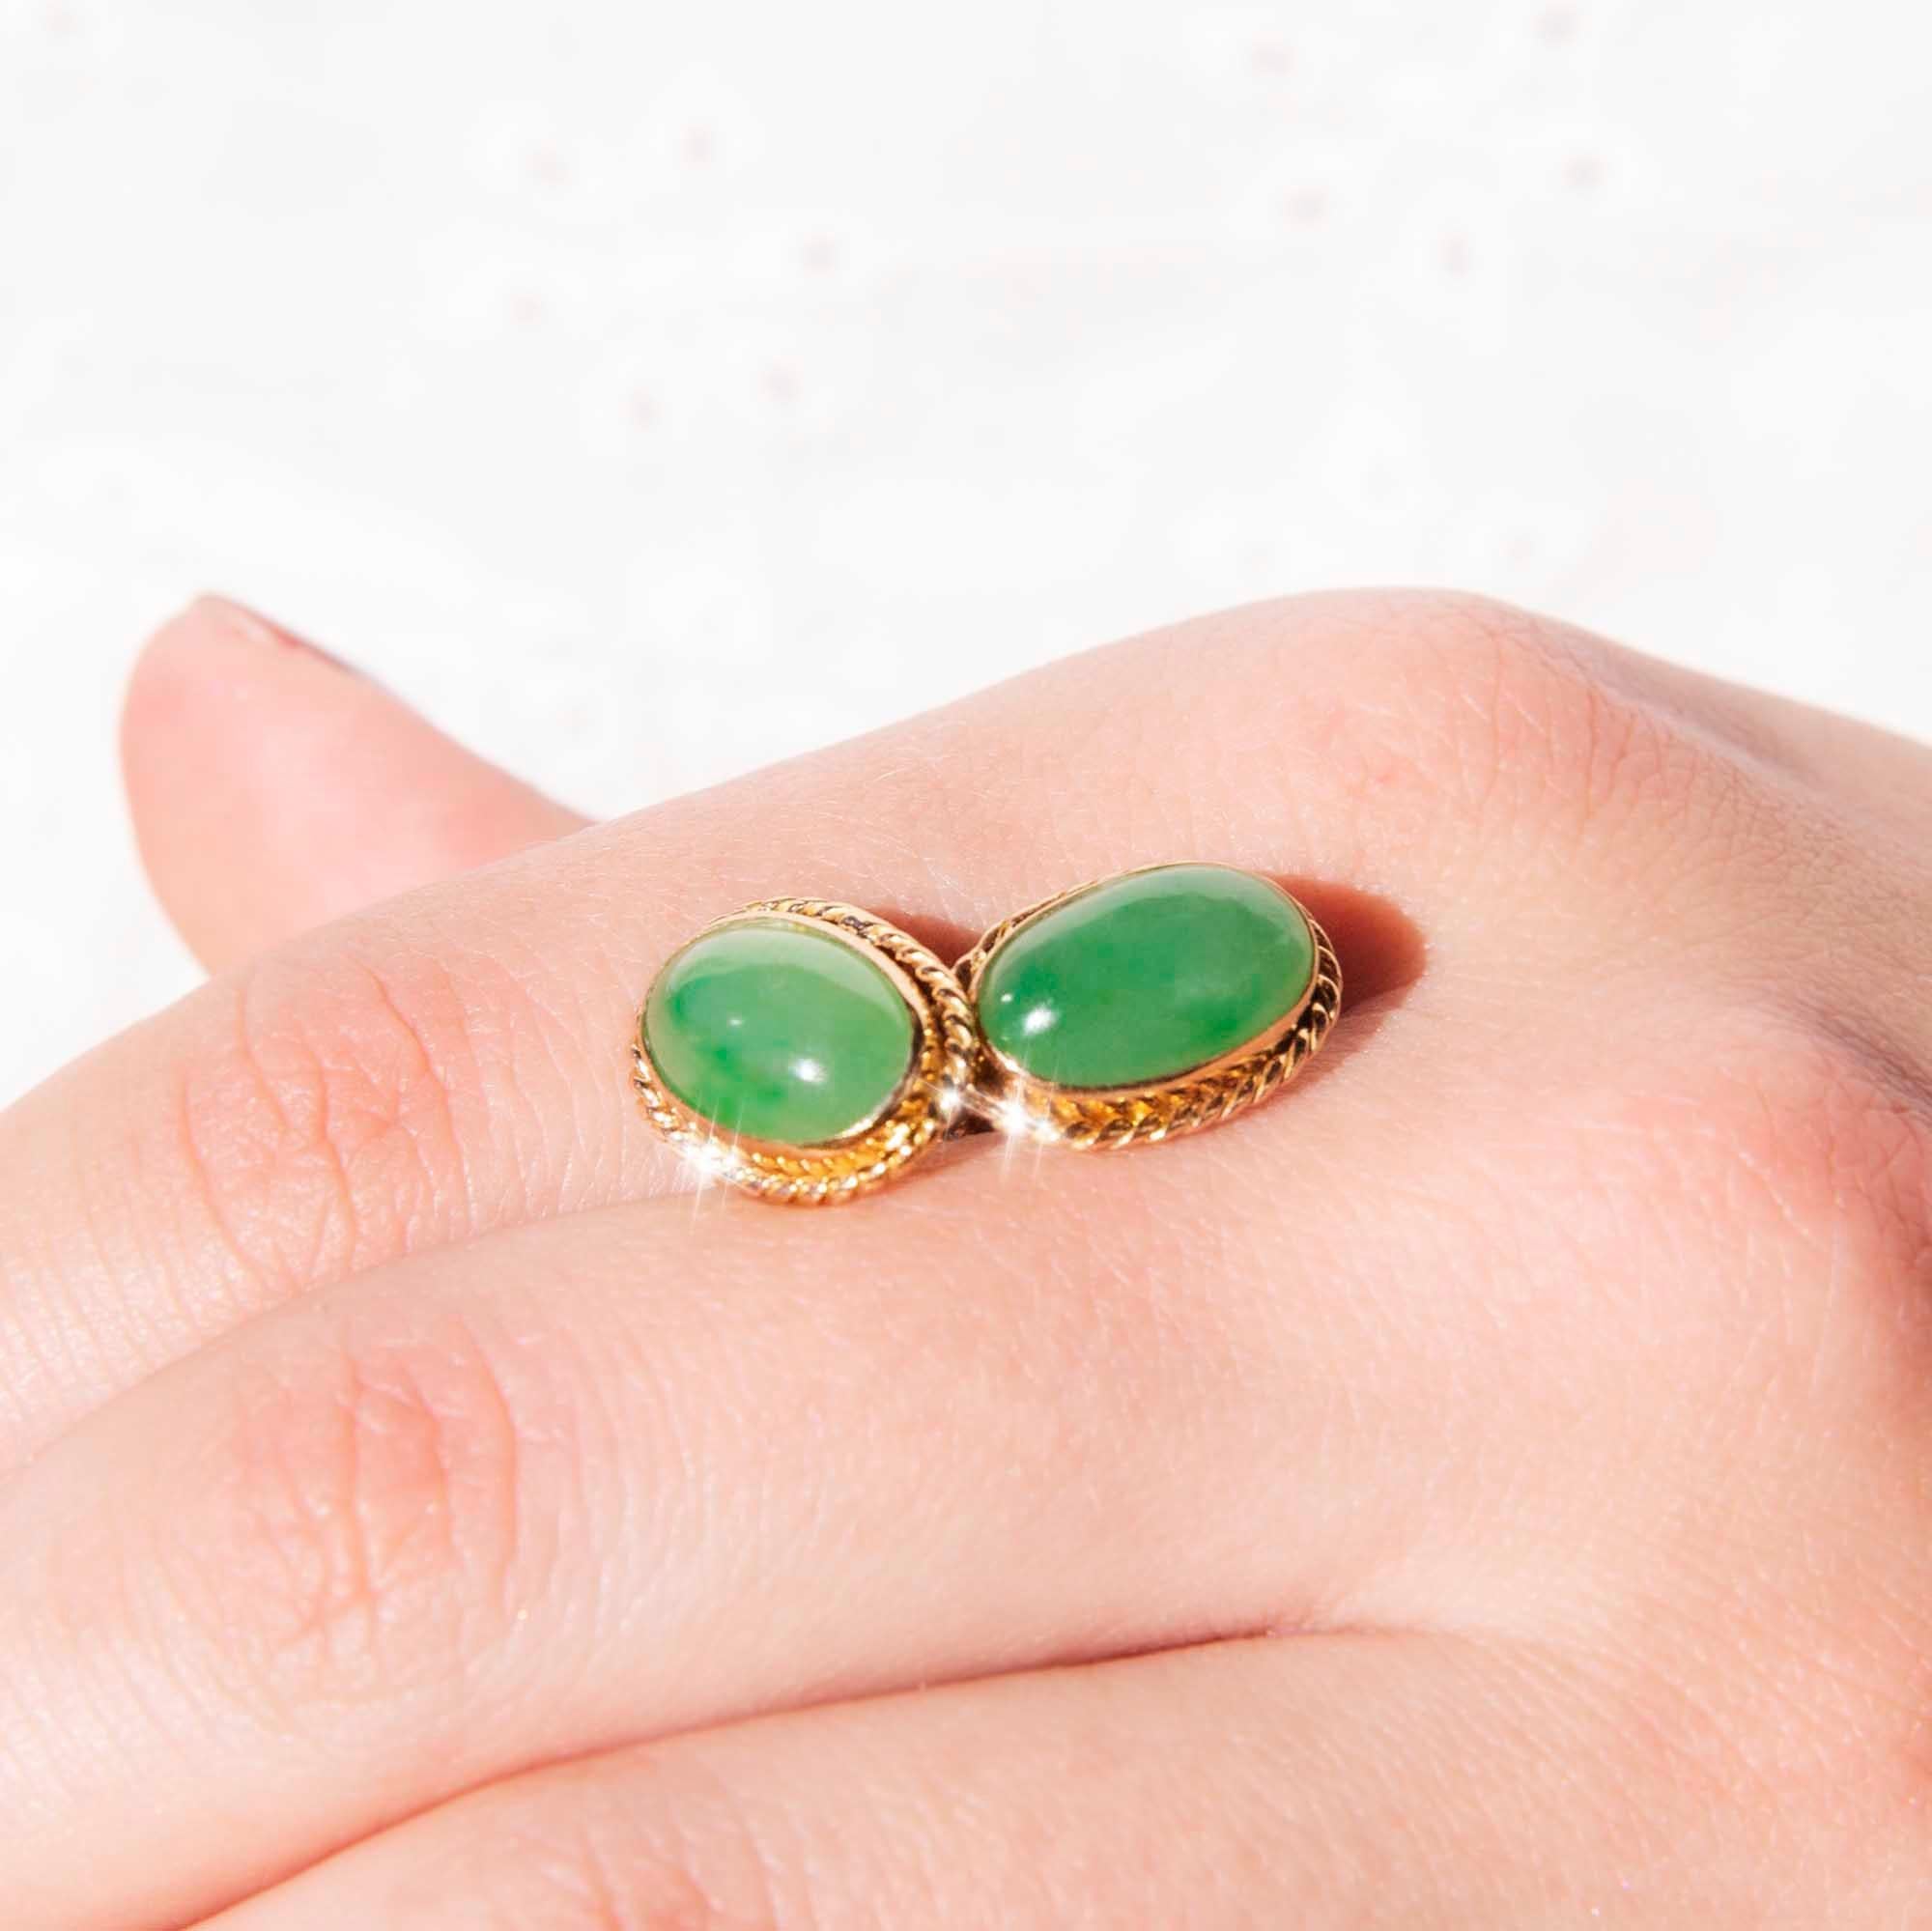 Crafted in 18 carat yellow gold, these opulent vintage earrings each hold one opulent translucent oval jadeite jade cabochon with a rope-textured border. We have named them The Argi Earrings. Fitted with butterfly post backings for simple and